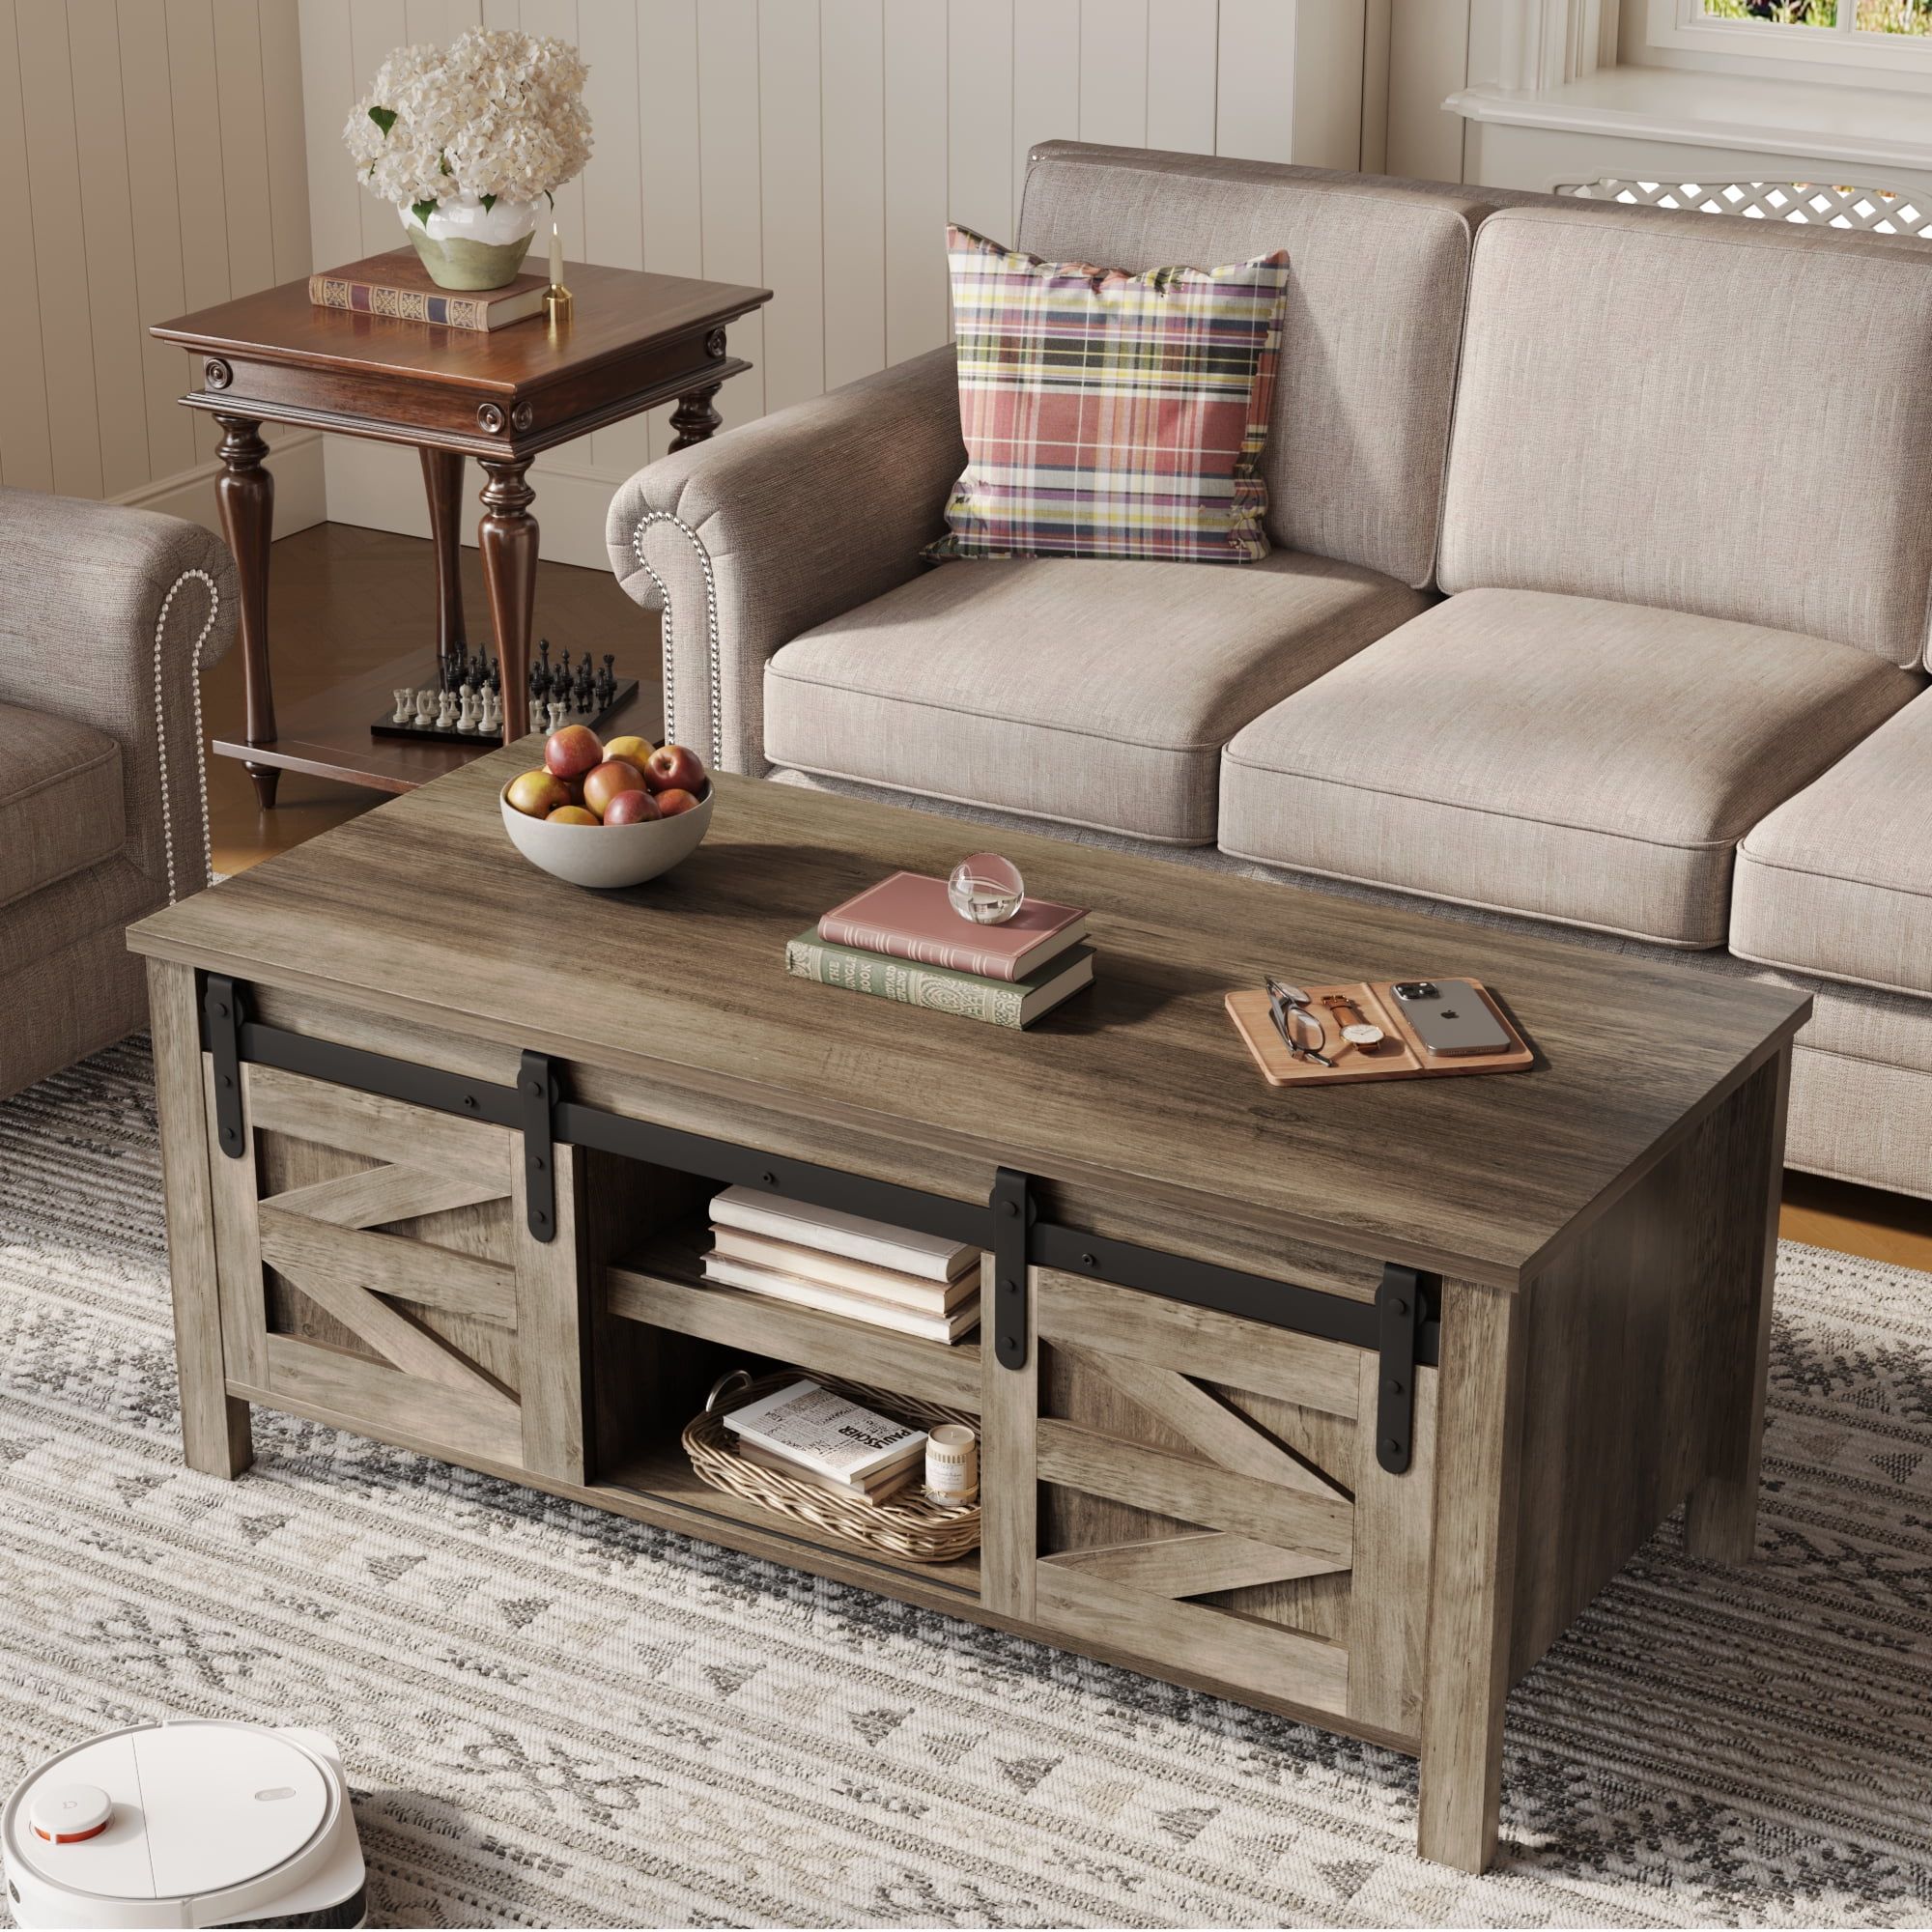 Homall Farmhouse Coffee Table Rustic Wooden Center Rectangular Table With Sliding  Barn Doors, Adjustable Cabinet Shelves For Bedroom, Home Office, Living  Room, Gray – Walmart Regarding Coffee Tables With Sliding Barn Doors (View 12 of 15)